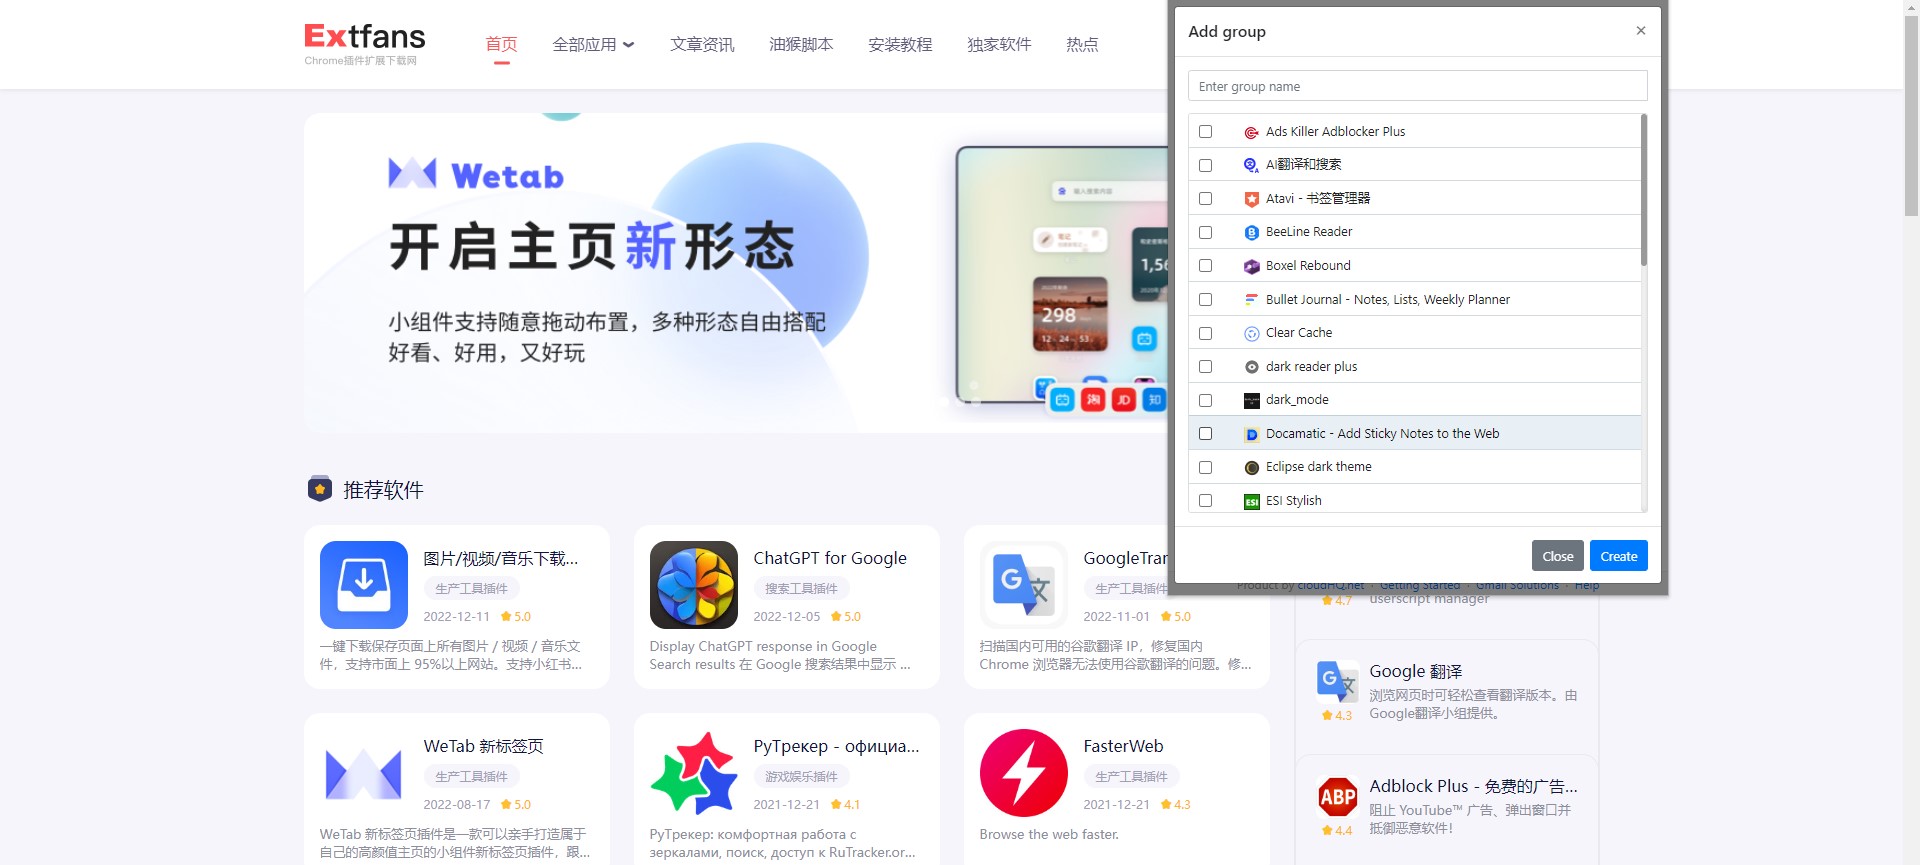 Chrome Extension Manager by cloudHQ 插件使用教程